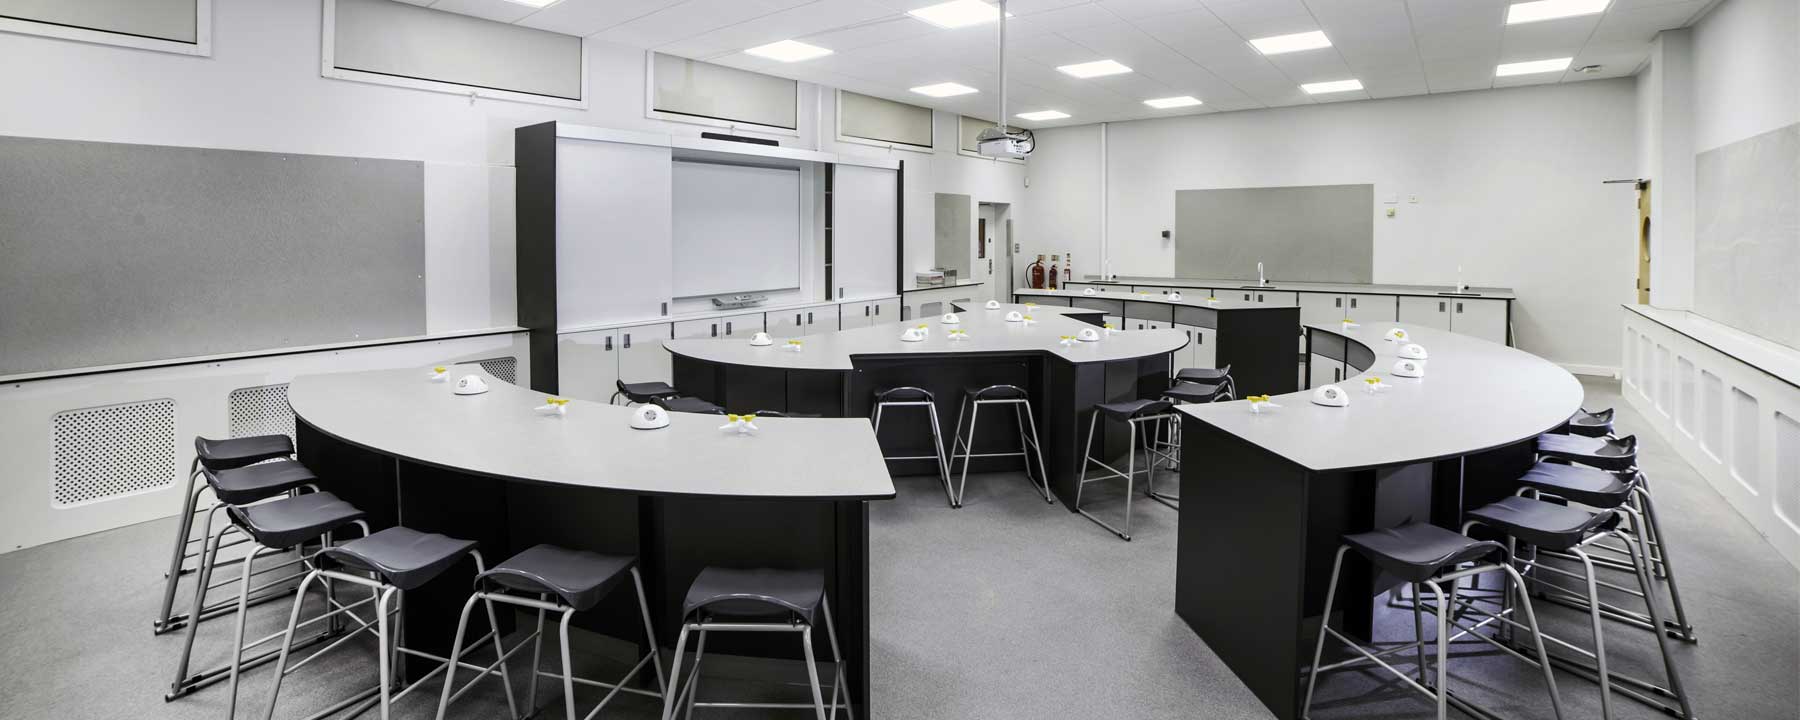 State Of The Art Classroom Design Hunkie